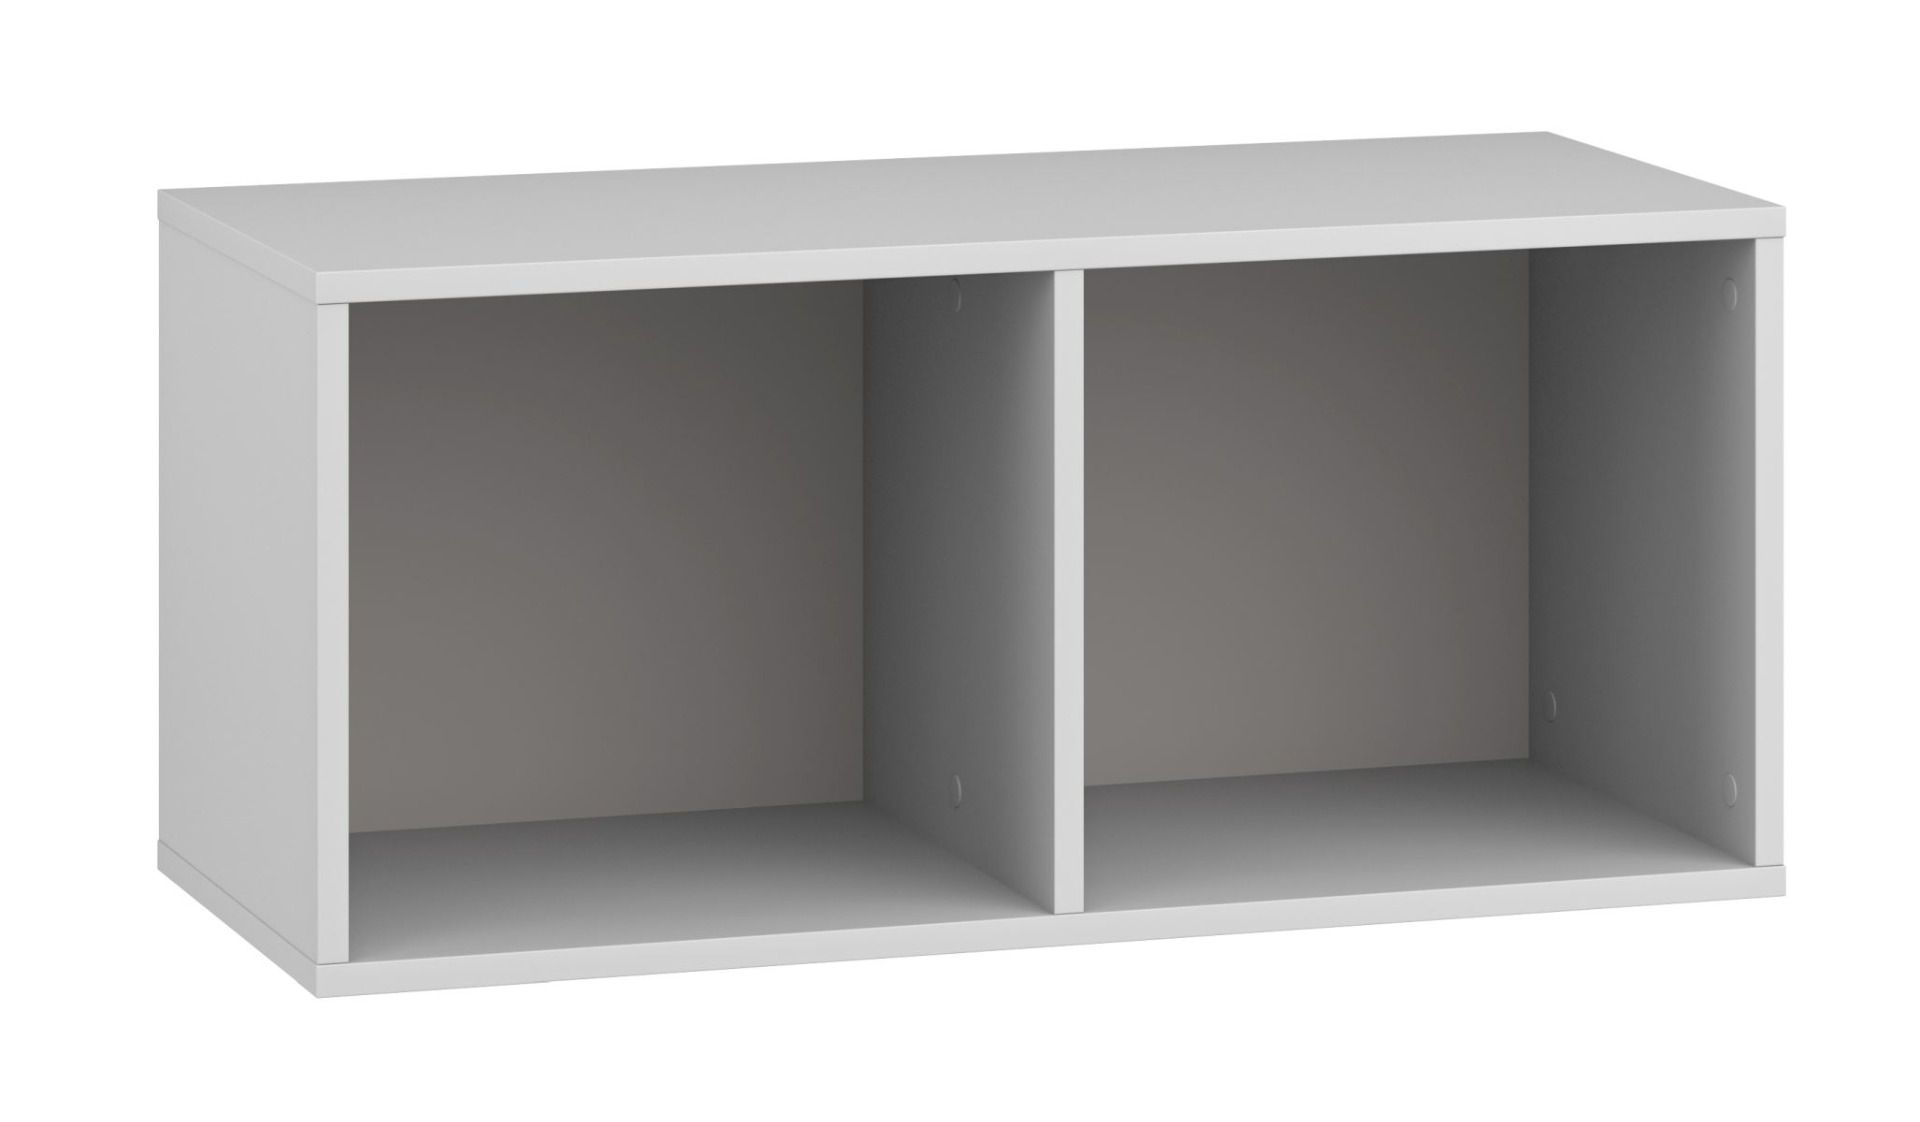 Hanging shelf / wall shelf Toivala 11, color: light grey - Dimensions: 36 x 79 x 34 cm (H x W x D), with 2 compartments